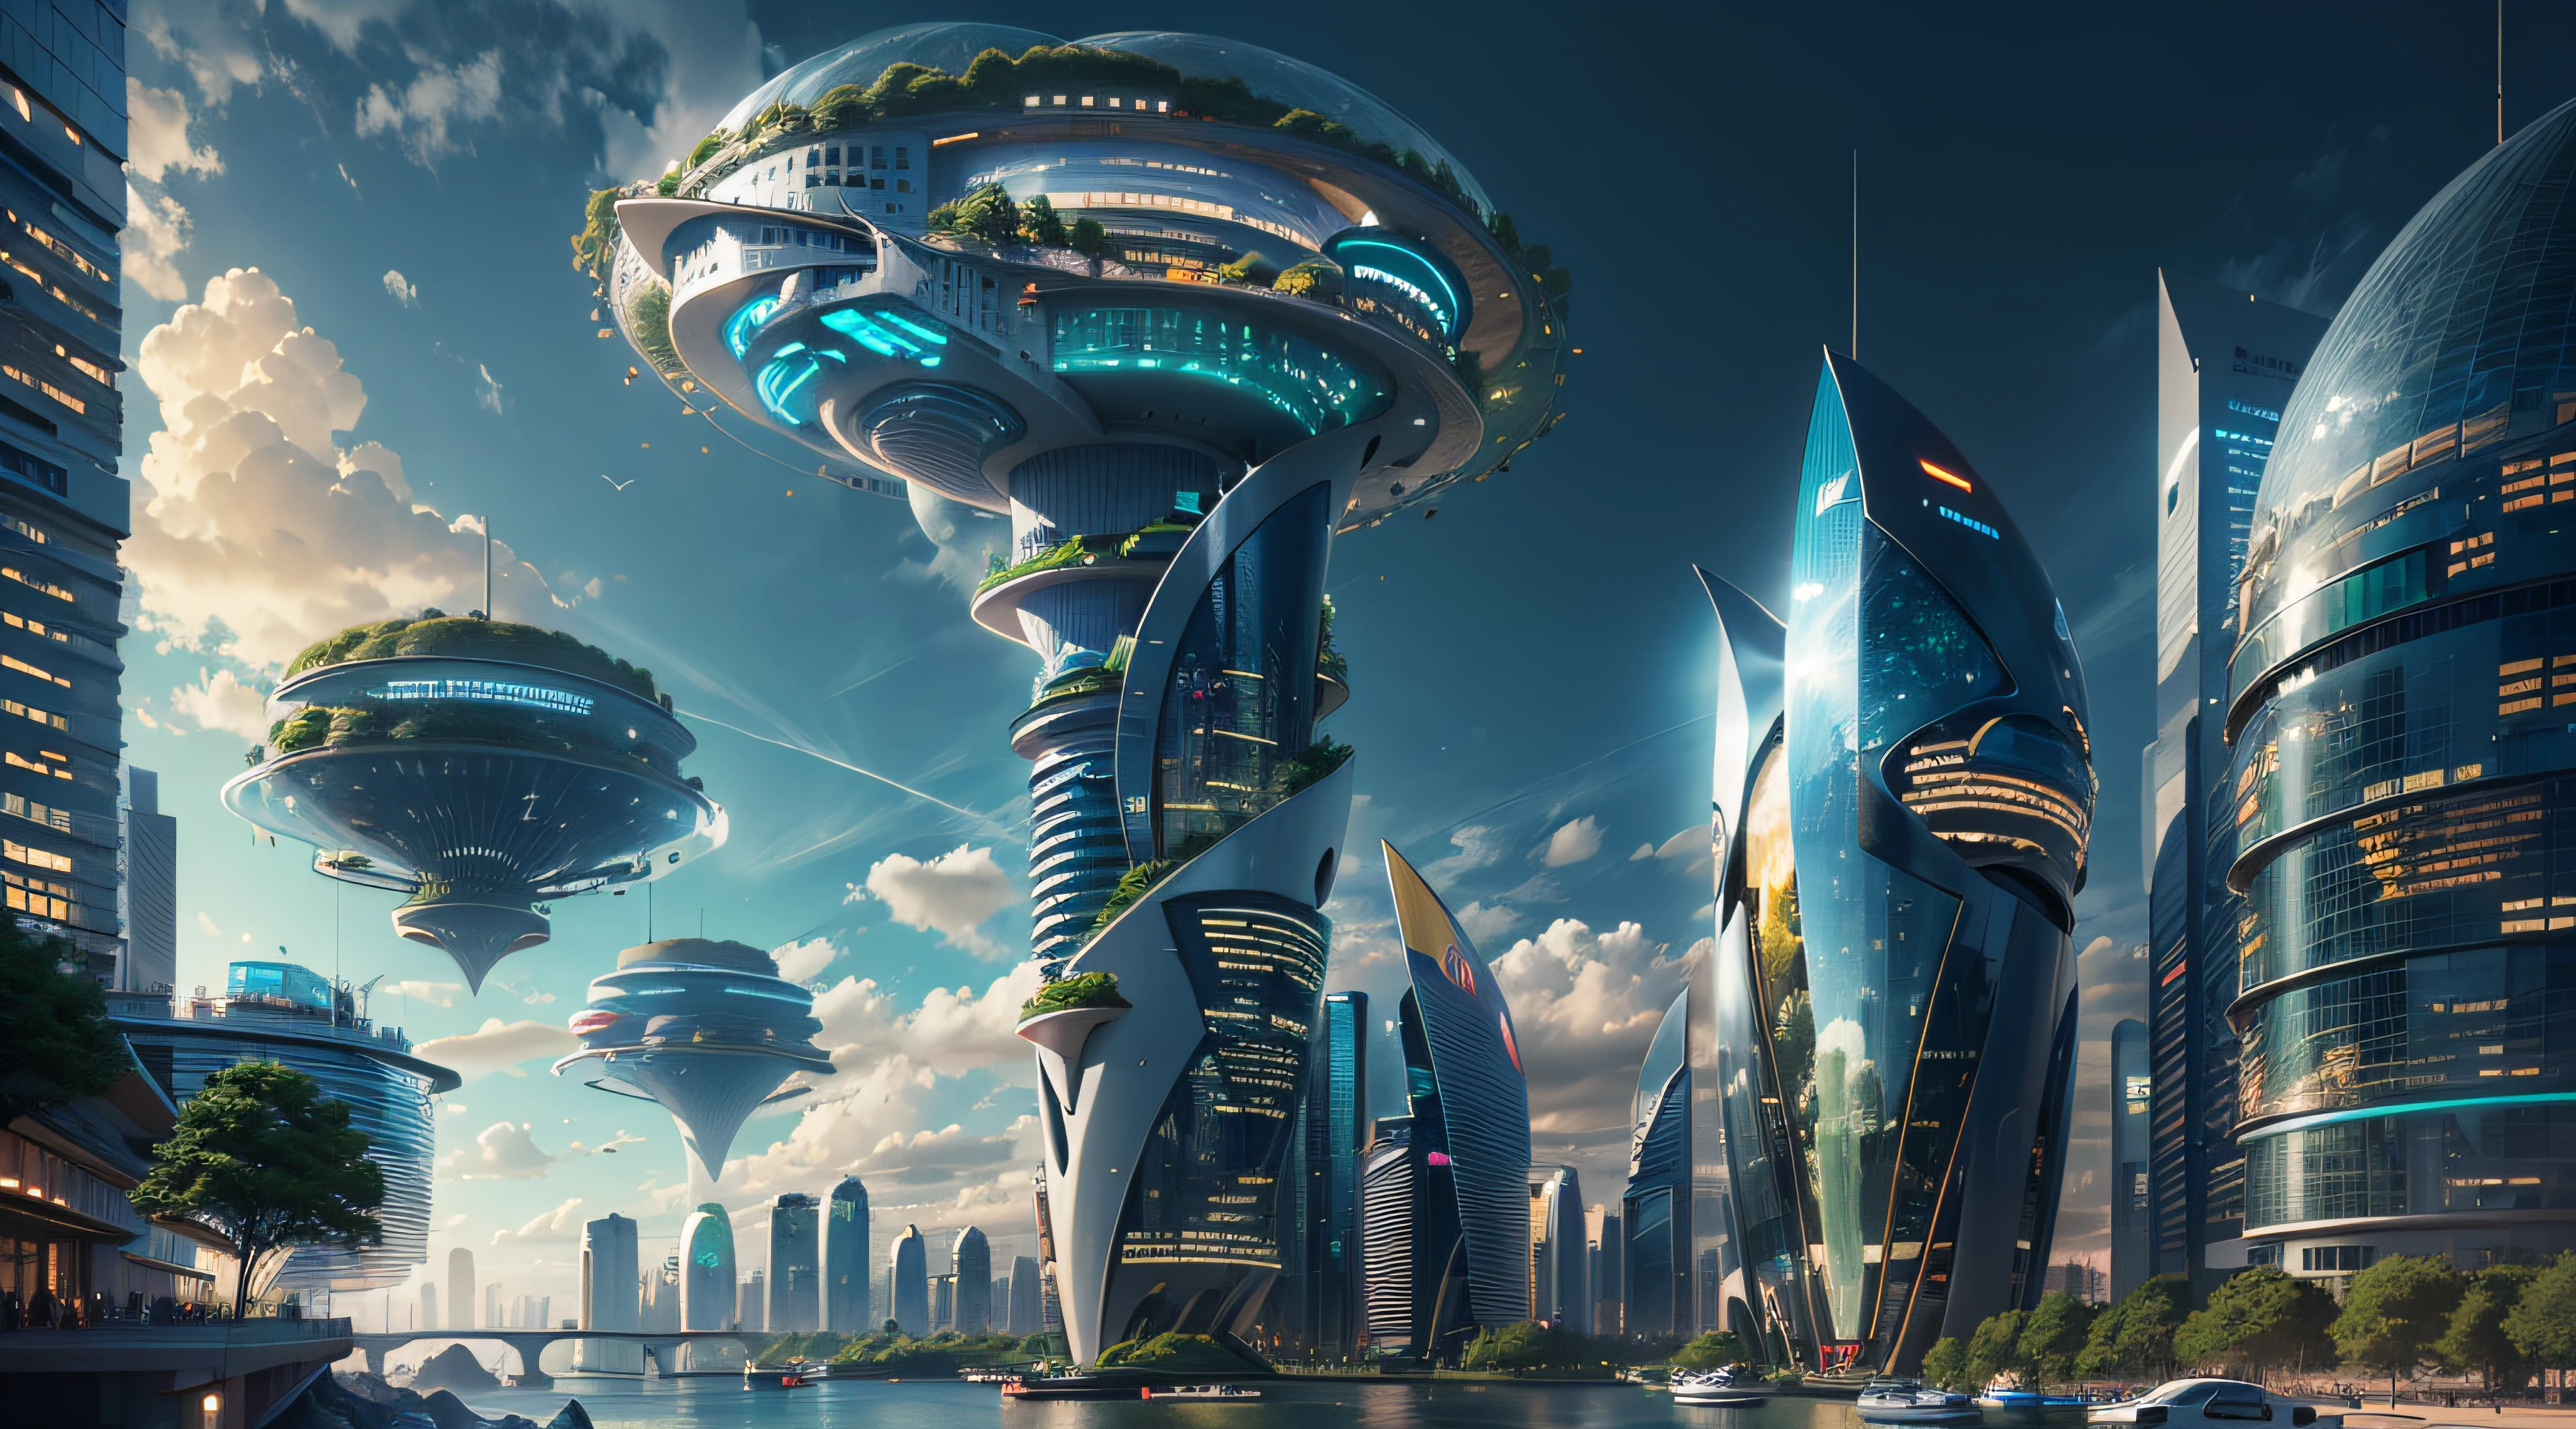 (Best quality,4K,8K,A high resolution,Masterpiece:1.2),Ultra-detailed,(Realistic,Photorealistic,photo-realistic:1.37),Futuristic floating city,Futuristic technology,Huge urban high-tech tablet platform,Airship,Floating in the sky,Futuristic city,Small airships around,High-tech hemispherical platform,Colorful lights,Advanced architecture,modernn architecture,skyscrapper,Access the cloud,Scenic beauty,view over city,Impressive design,Blend seamlessly with nature,energetic and vibrant atmosphere,Futuristic transportation system,Parking is suspended,Transparent path,Lush greenery,Sky gardens,cascading waterfalls,Magnificent skyline,reflections on the water,Sparkling river,Architectural innovation,futuristic skyscrapers,Transparent dome,The shape of the building is unusual,Elevated walkway,Impressive skyline,Glowing lights,Futuristic technology,Minimalist design,Scenic spots,Panoramic view,Cloud Piercing Tower,Vibrant colors,epic sunrise,epic sunset,Dazzling light display,magical ambiance,The future city,Urban Utopia,LuxuryLifestyle,Innovative energy,sustainable development,Smart city technology,Advanced infrastructure,Tranquil atmosphere,Nature and technology live in harmony,Awesome cityscape,Unprecedented urban planning,Architecture connects seamlessly with nature,High-tech metropolis,A cutting-edge engineering marvel,The future of urban living,Visionary architectural concept,Energy-efficient buildings,Harmony with the environment,A city floating above the clouds,Utopian dreams become reality,The possibilities are endless,State-of-the-art transportation network,Green energy integration,Innovative materials,Impressive holographic display,Advanced communication system,Breathtaking aerial view,Quiet and peaceful environment,Modernist aesthetics,Ethereal beauty